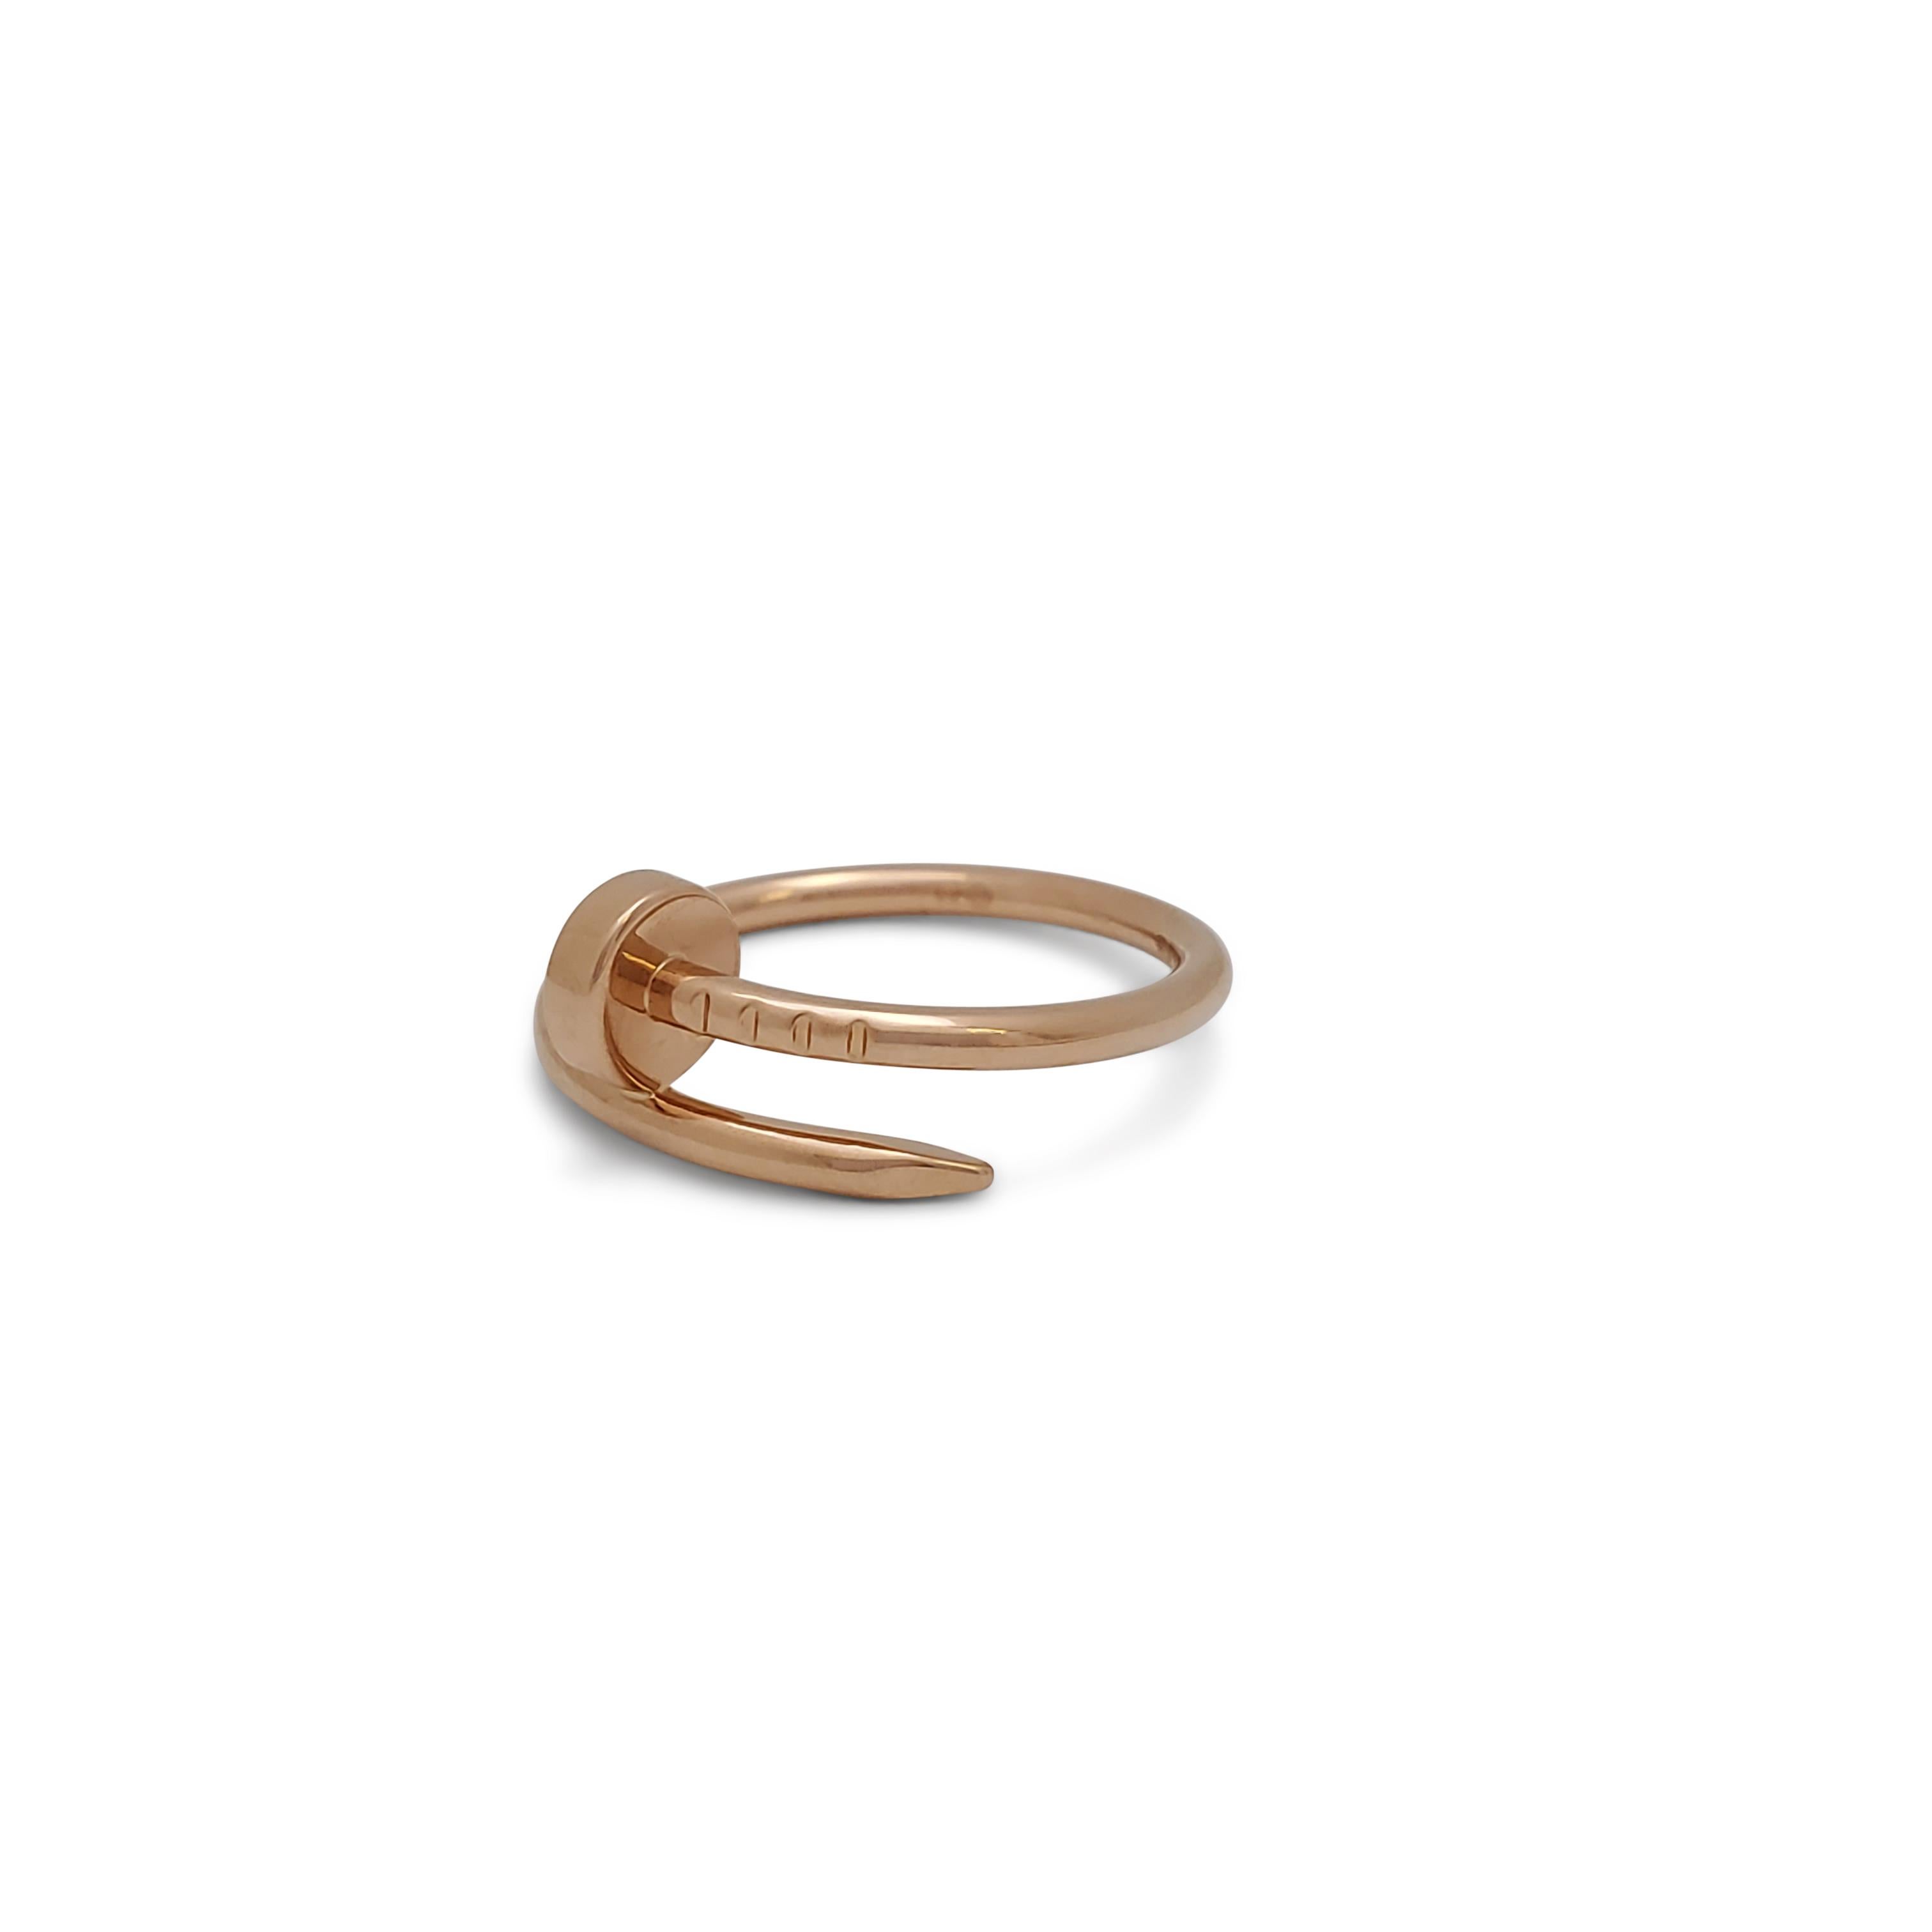 Designed as a 'just a nail', this authentic Cartier 'Juste un Clou' ring is modern, transcending the everyday, yet bold. The nail ring is an innovative twist on a familiar and ordinary object. Signed Cartier, 51, Au750, with serial number. Ring is